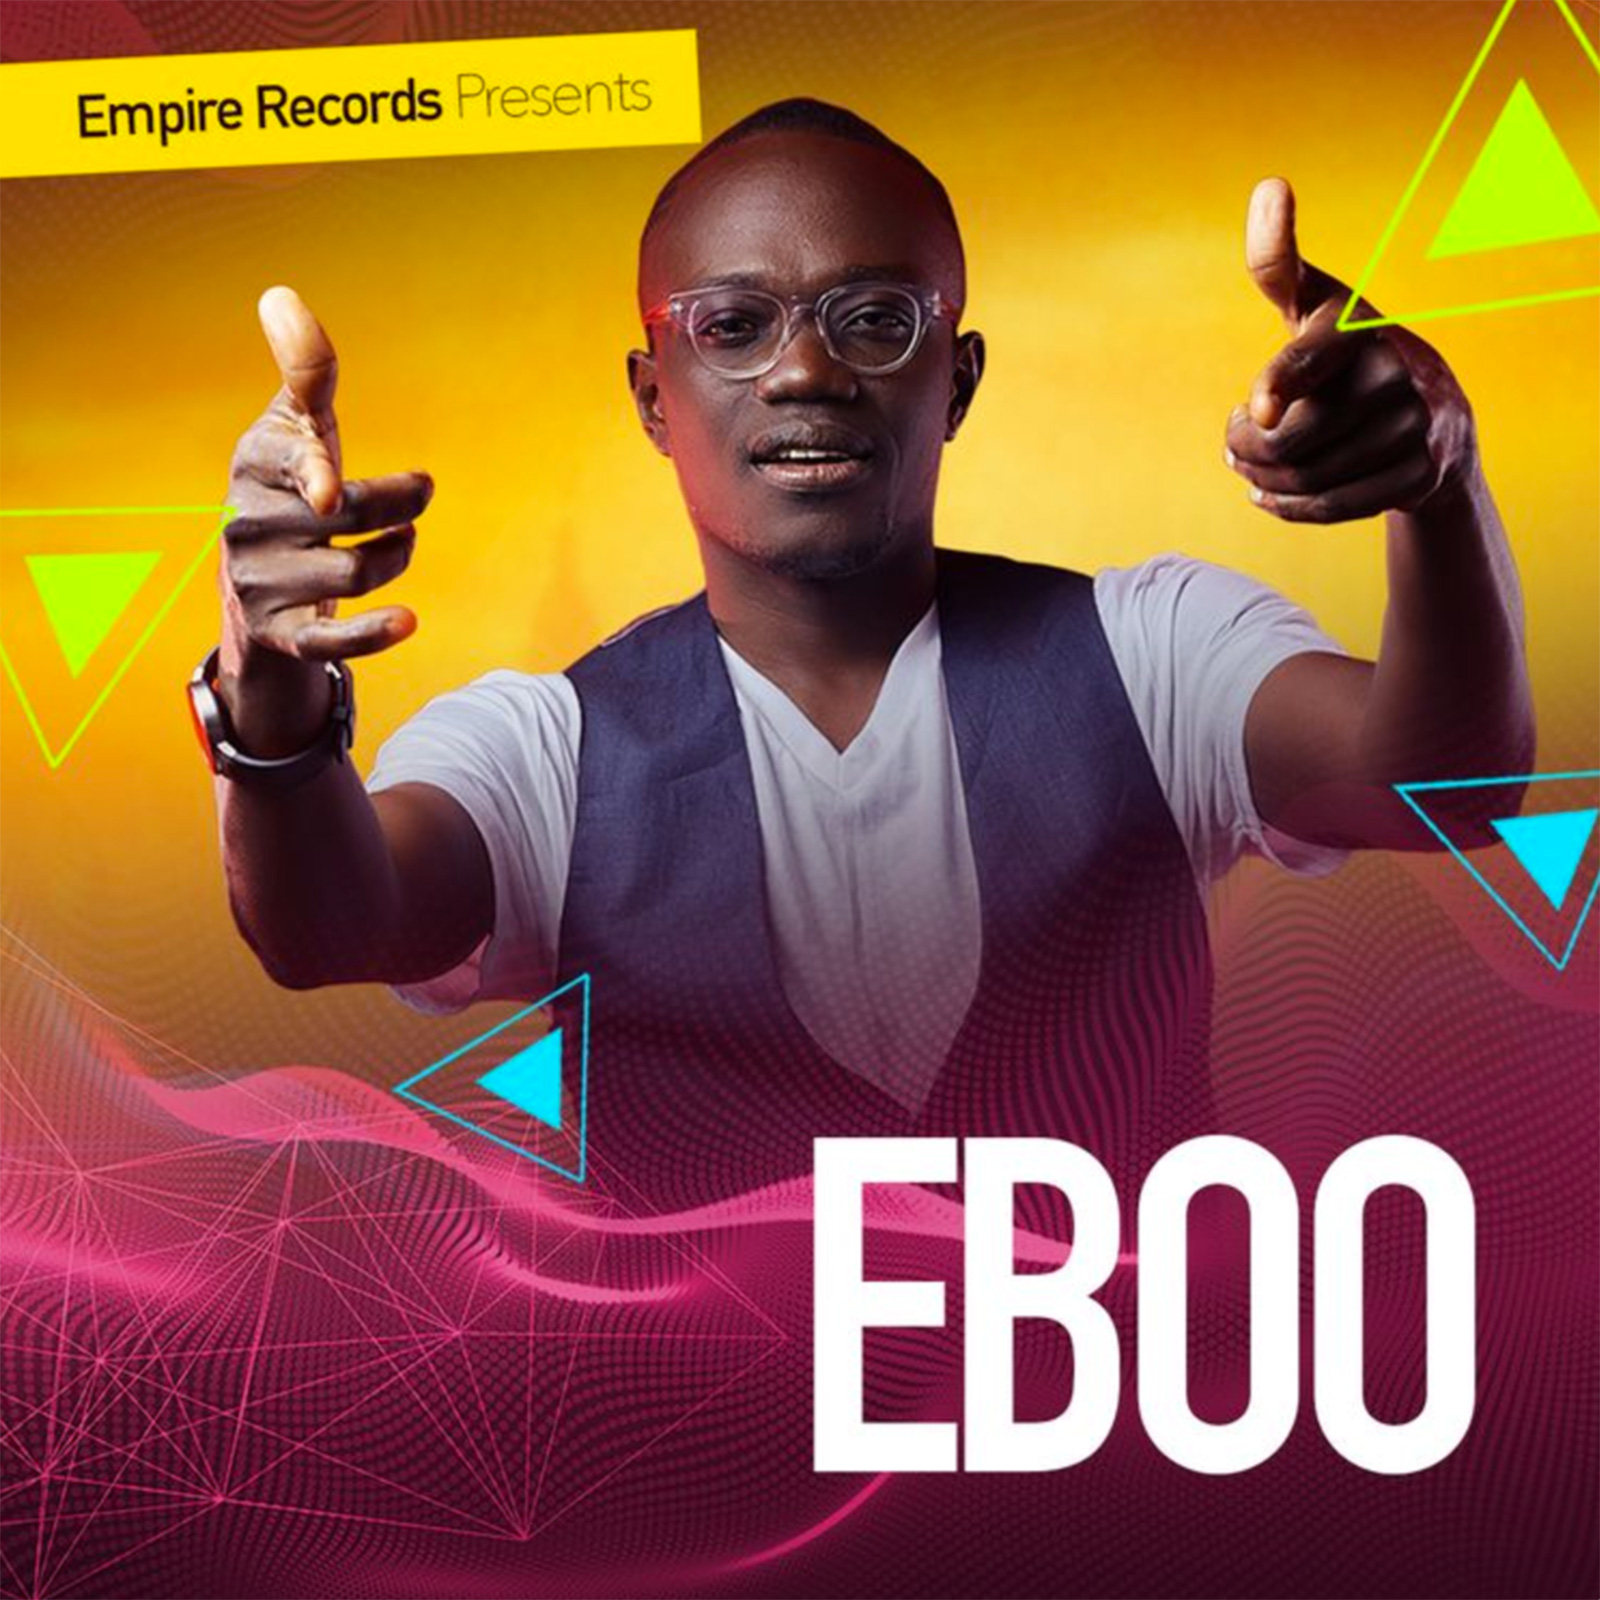 Nonstop by Eboo feat. Bouy Lyrical